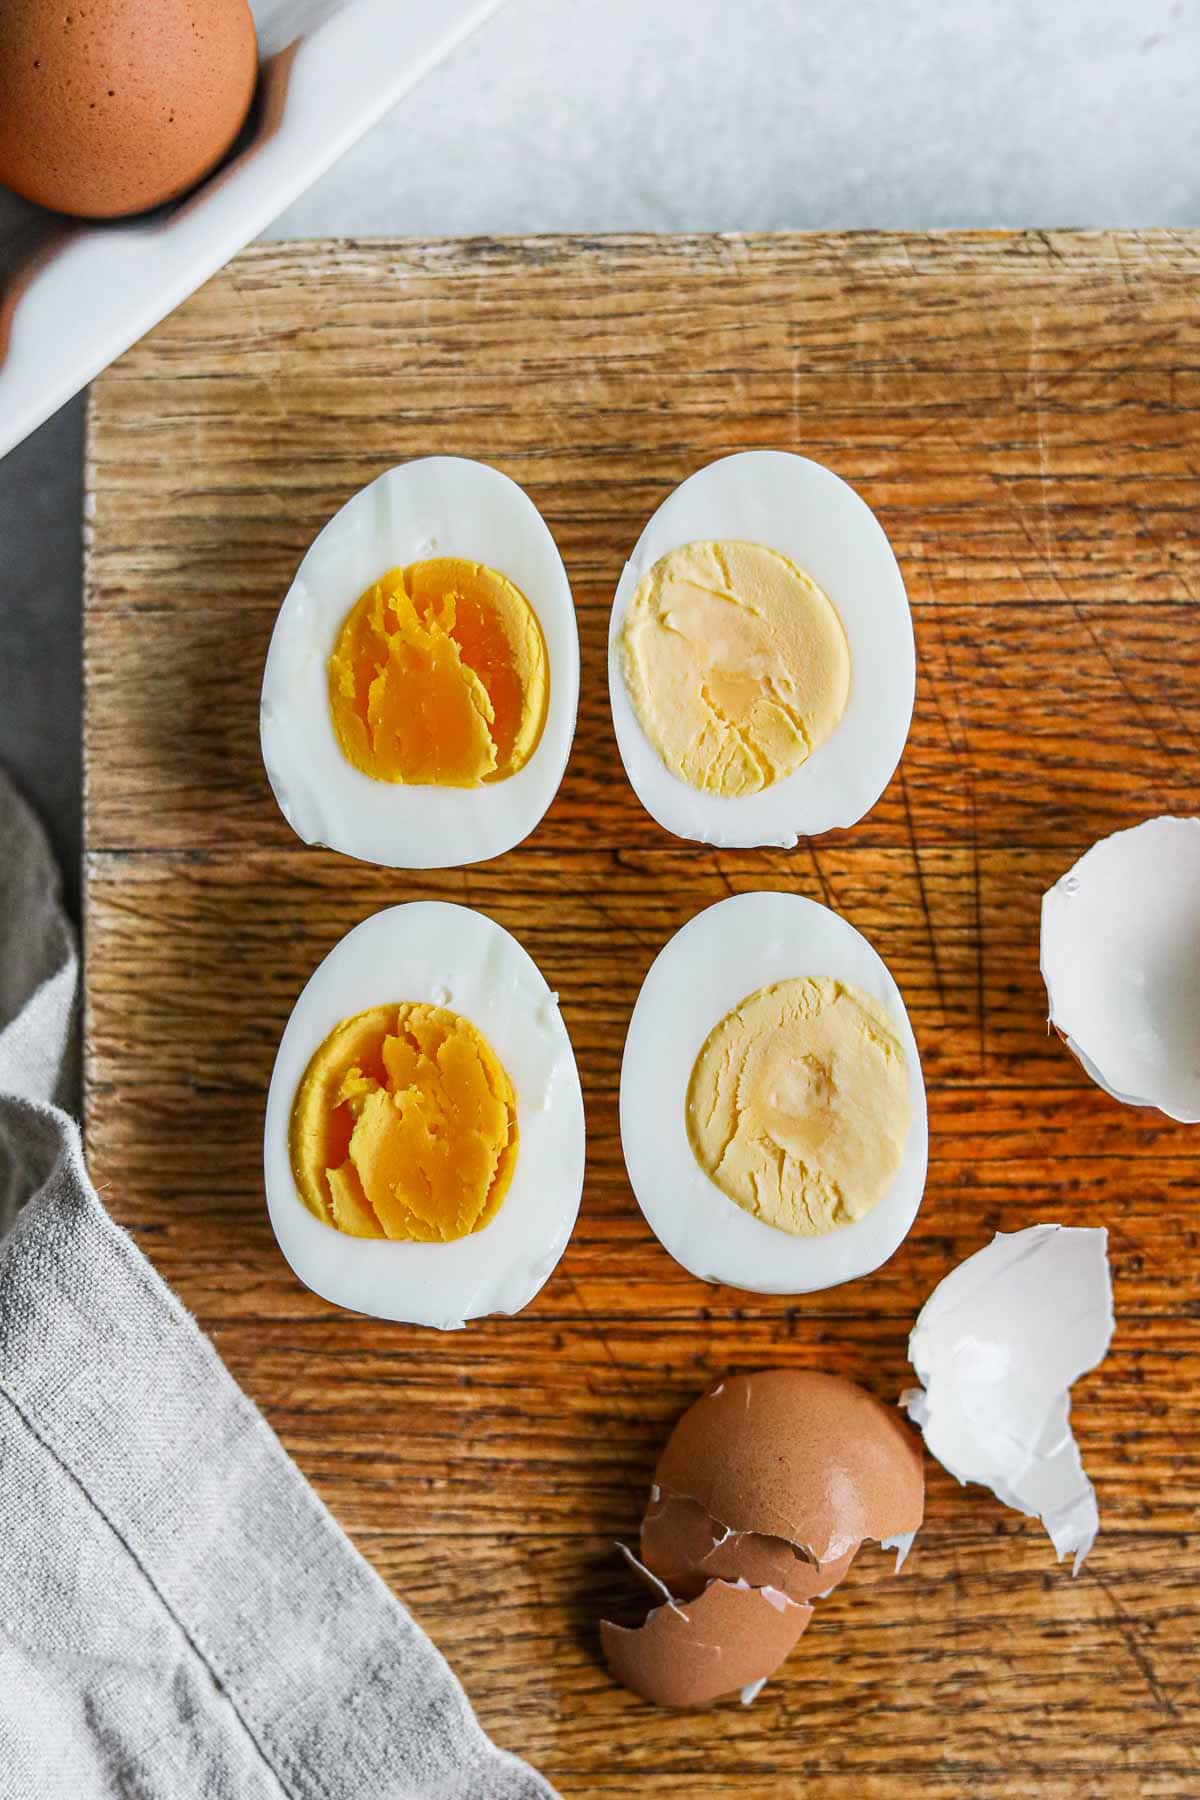 Sliced hard boiled eggs with orange soft yolks (9 minutes) and creamy yellow yolks (12 minutes). 